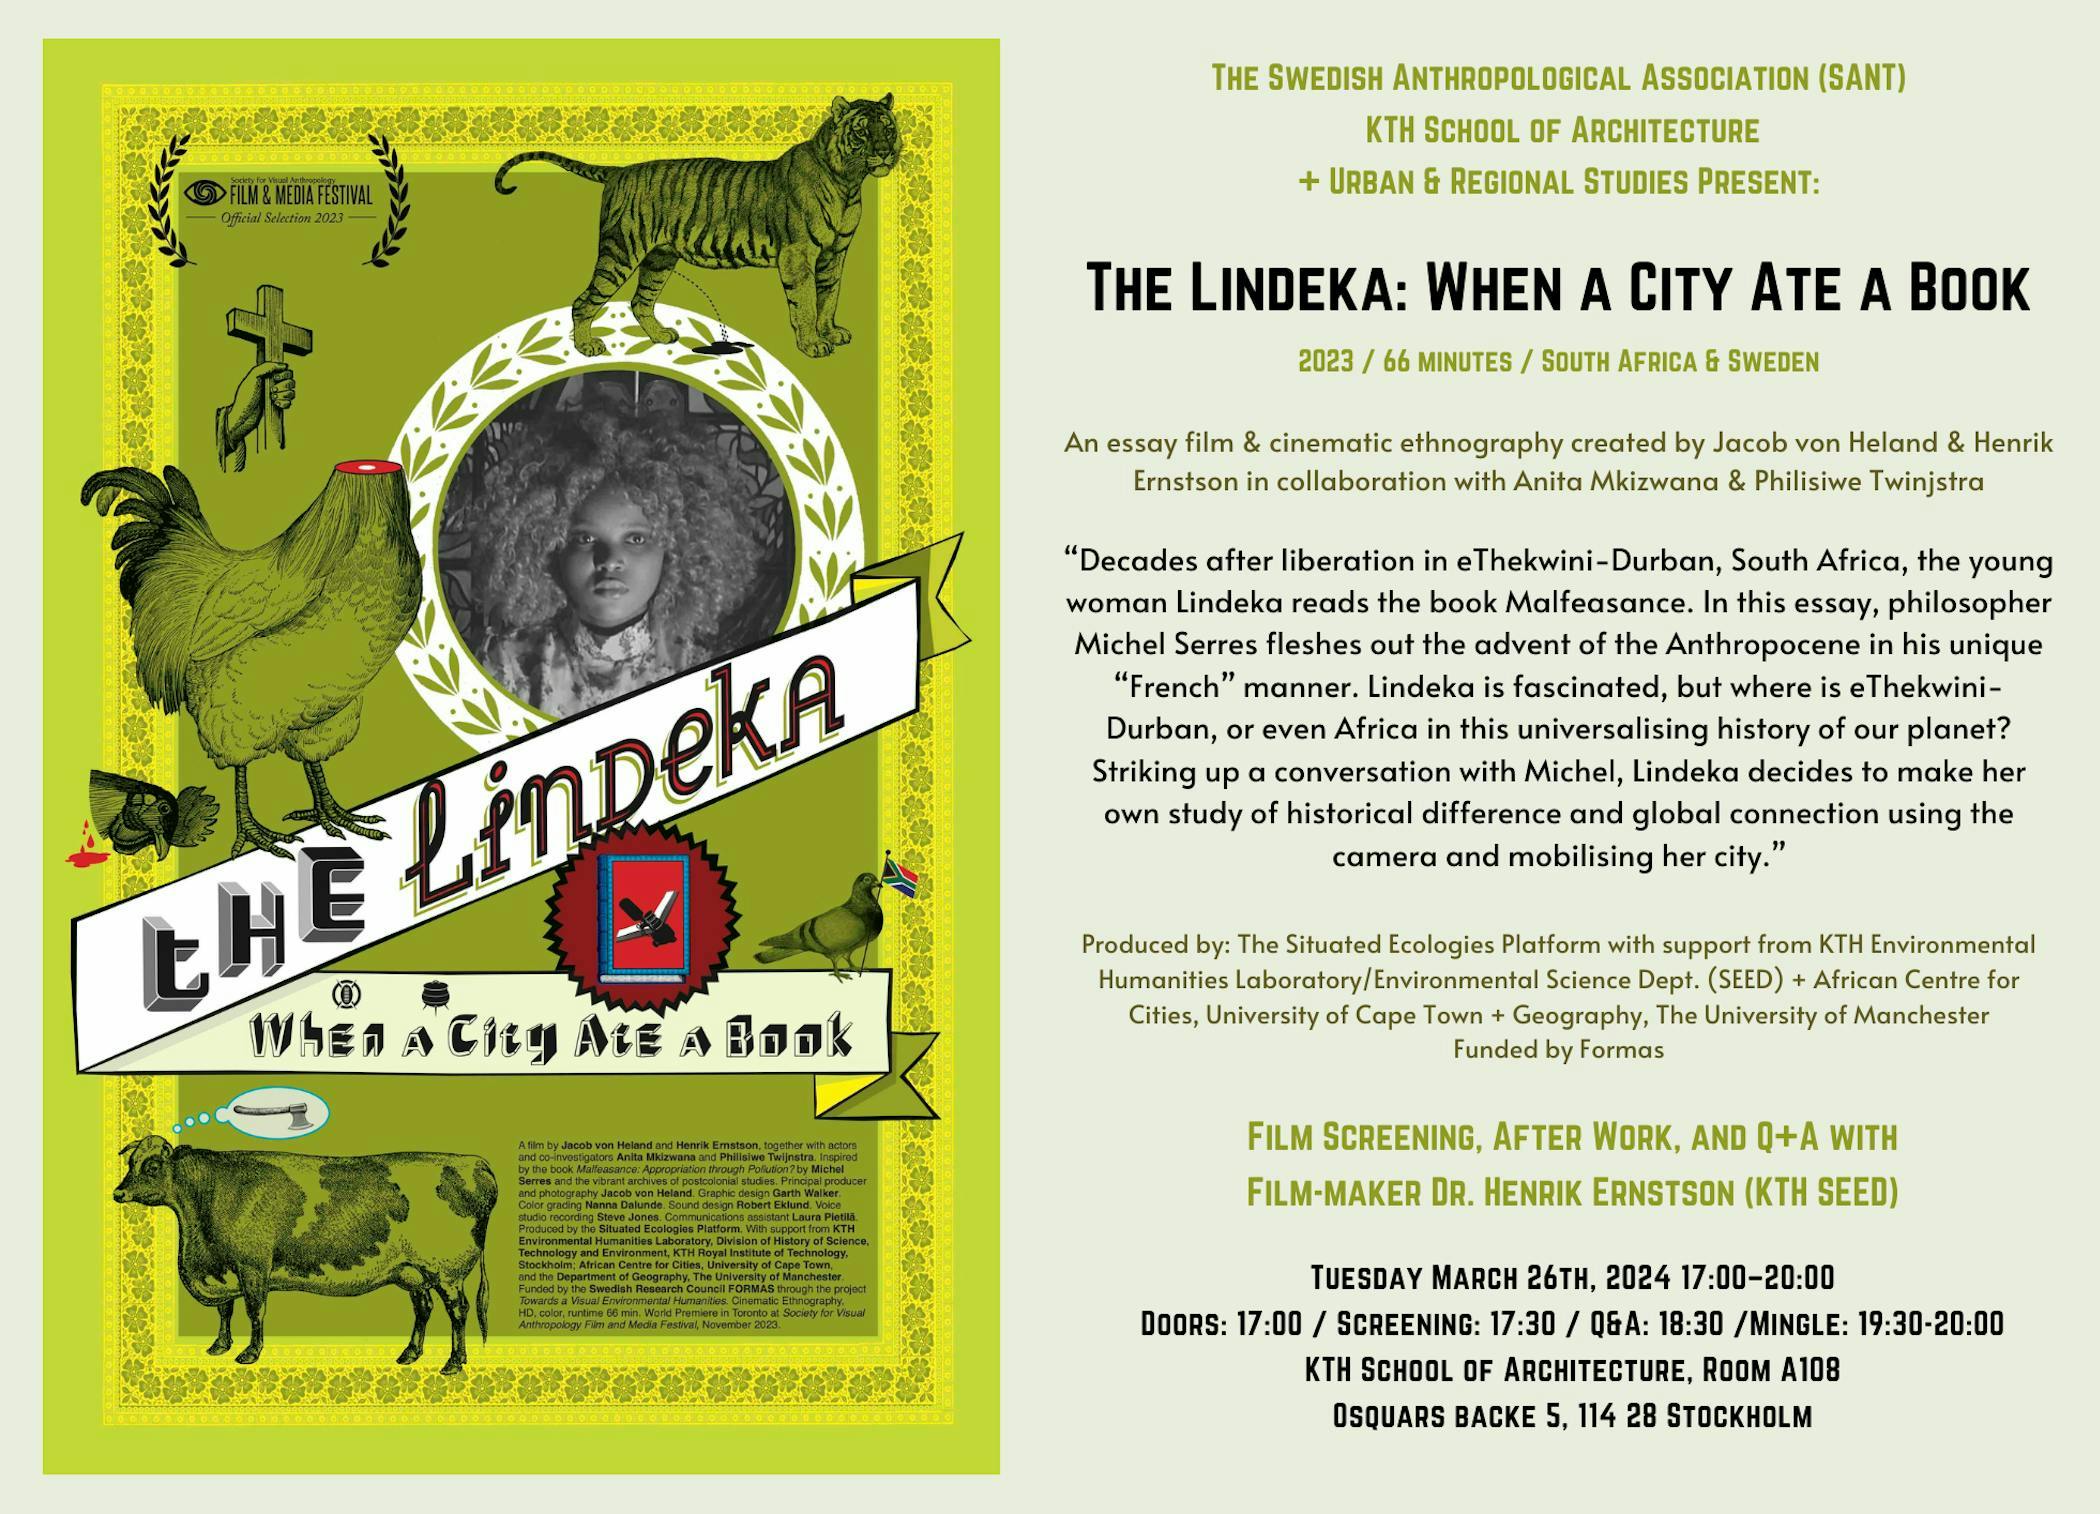 Film poster together with details of the film screening event 